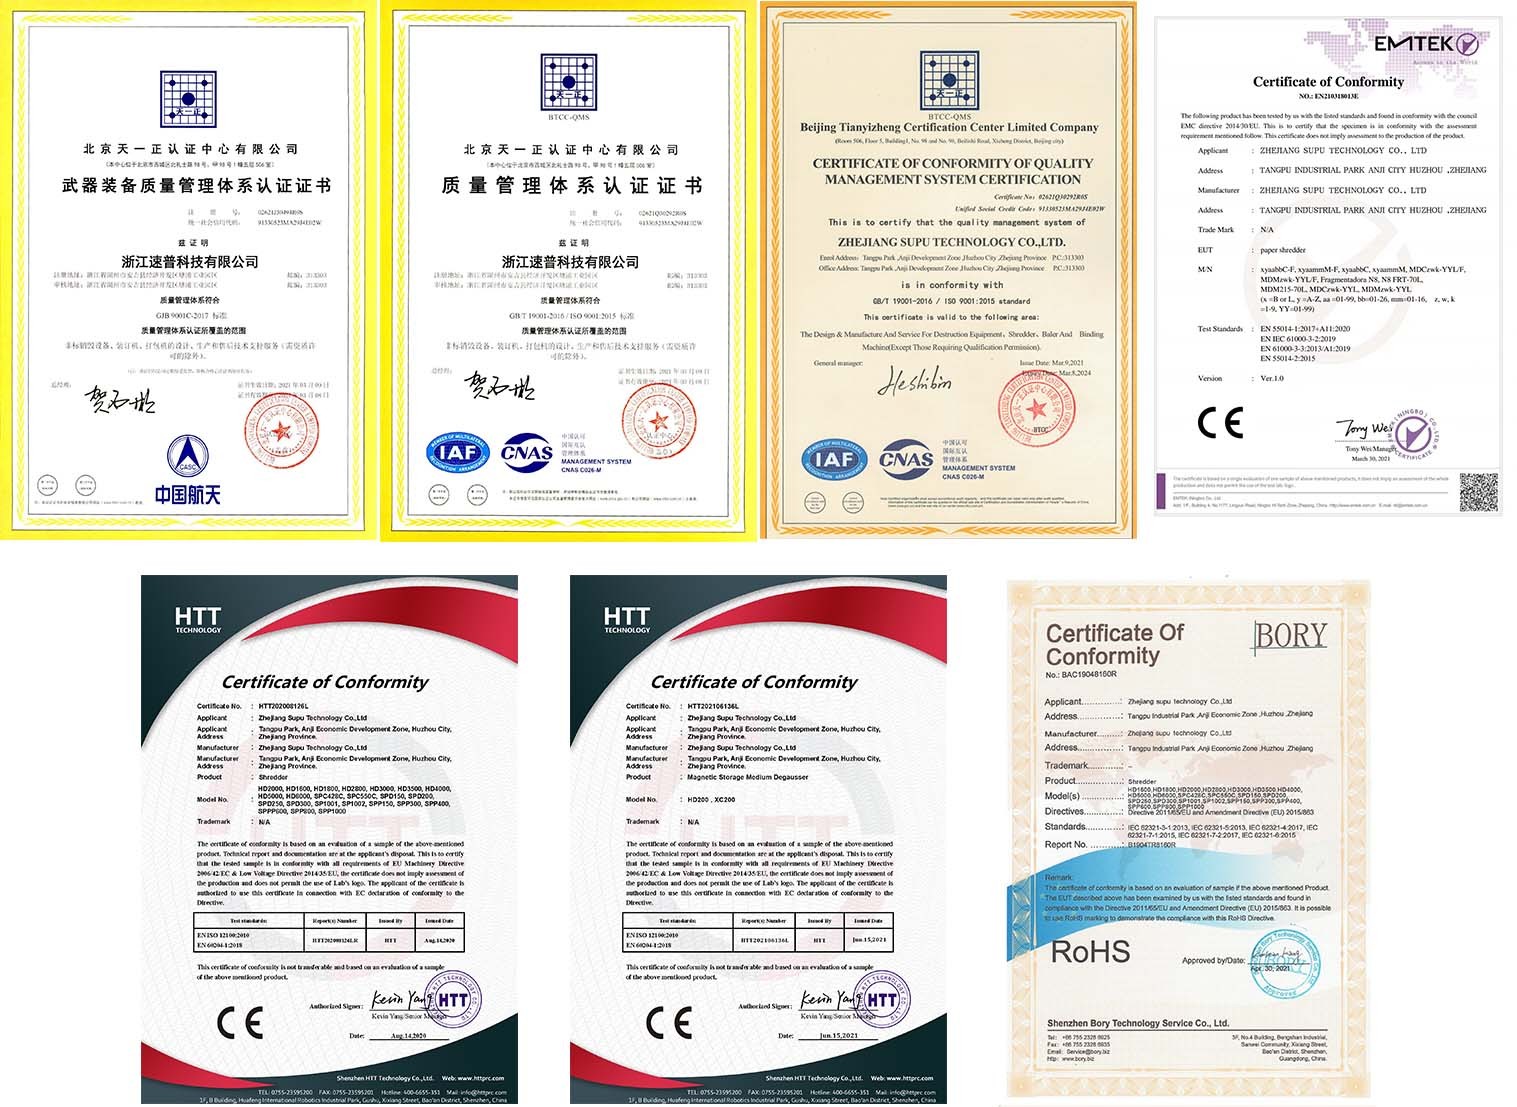 About certificates and patents